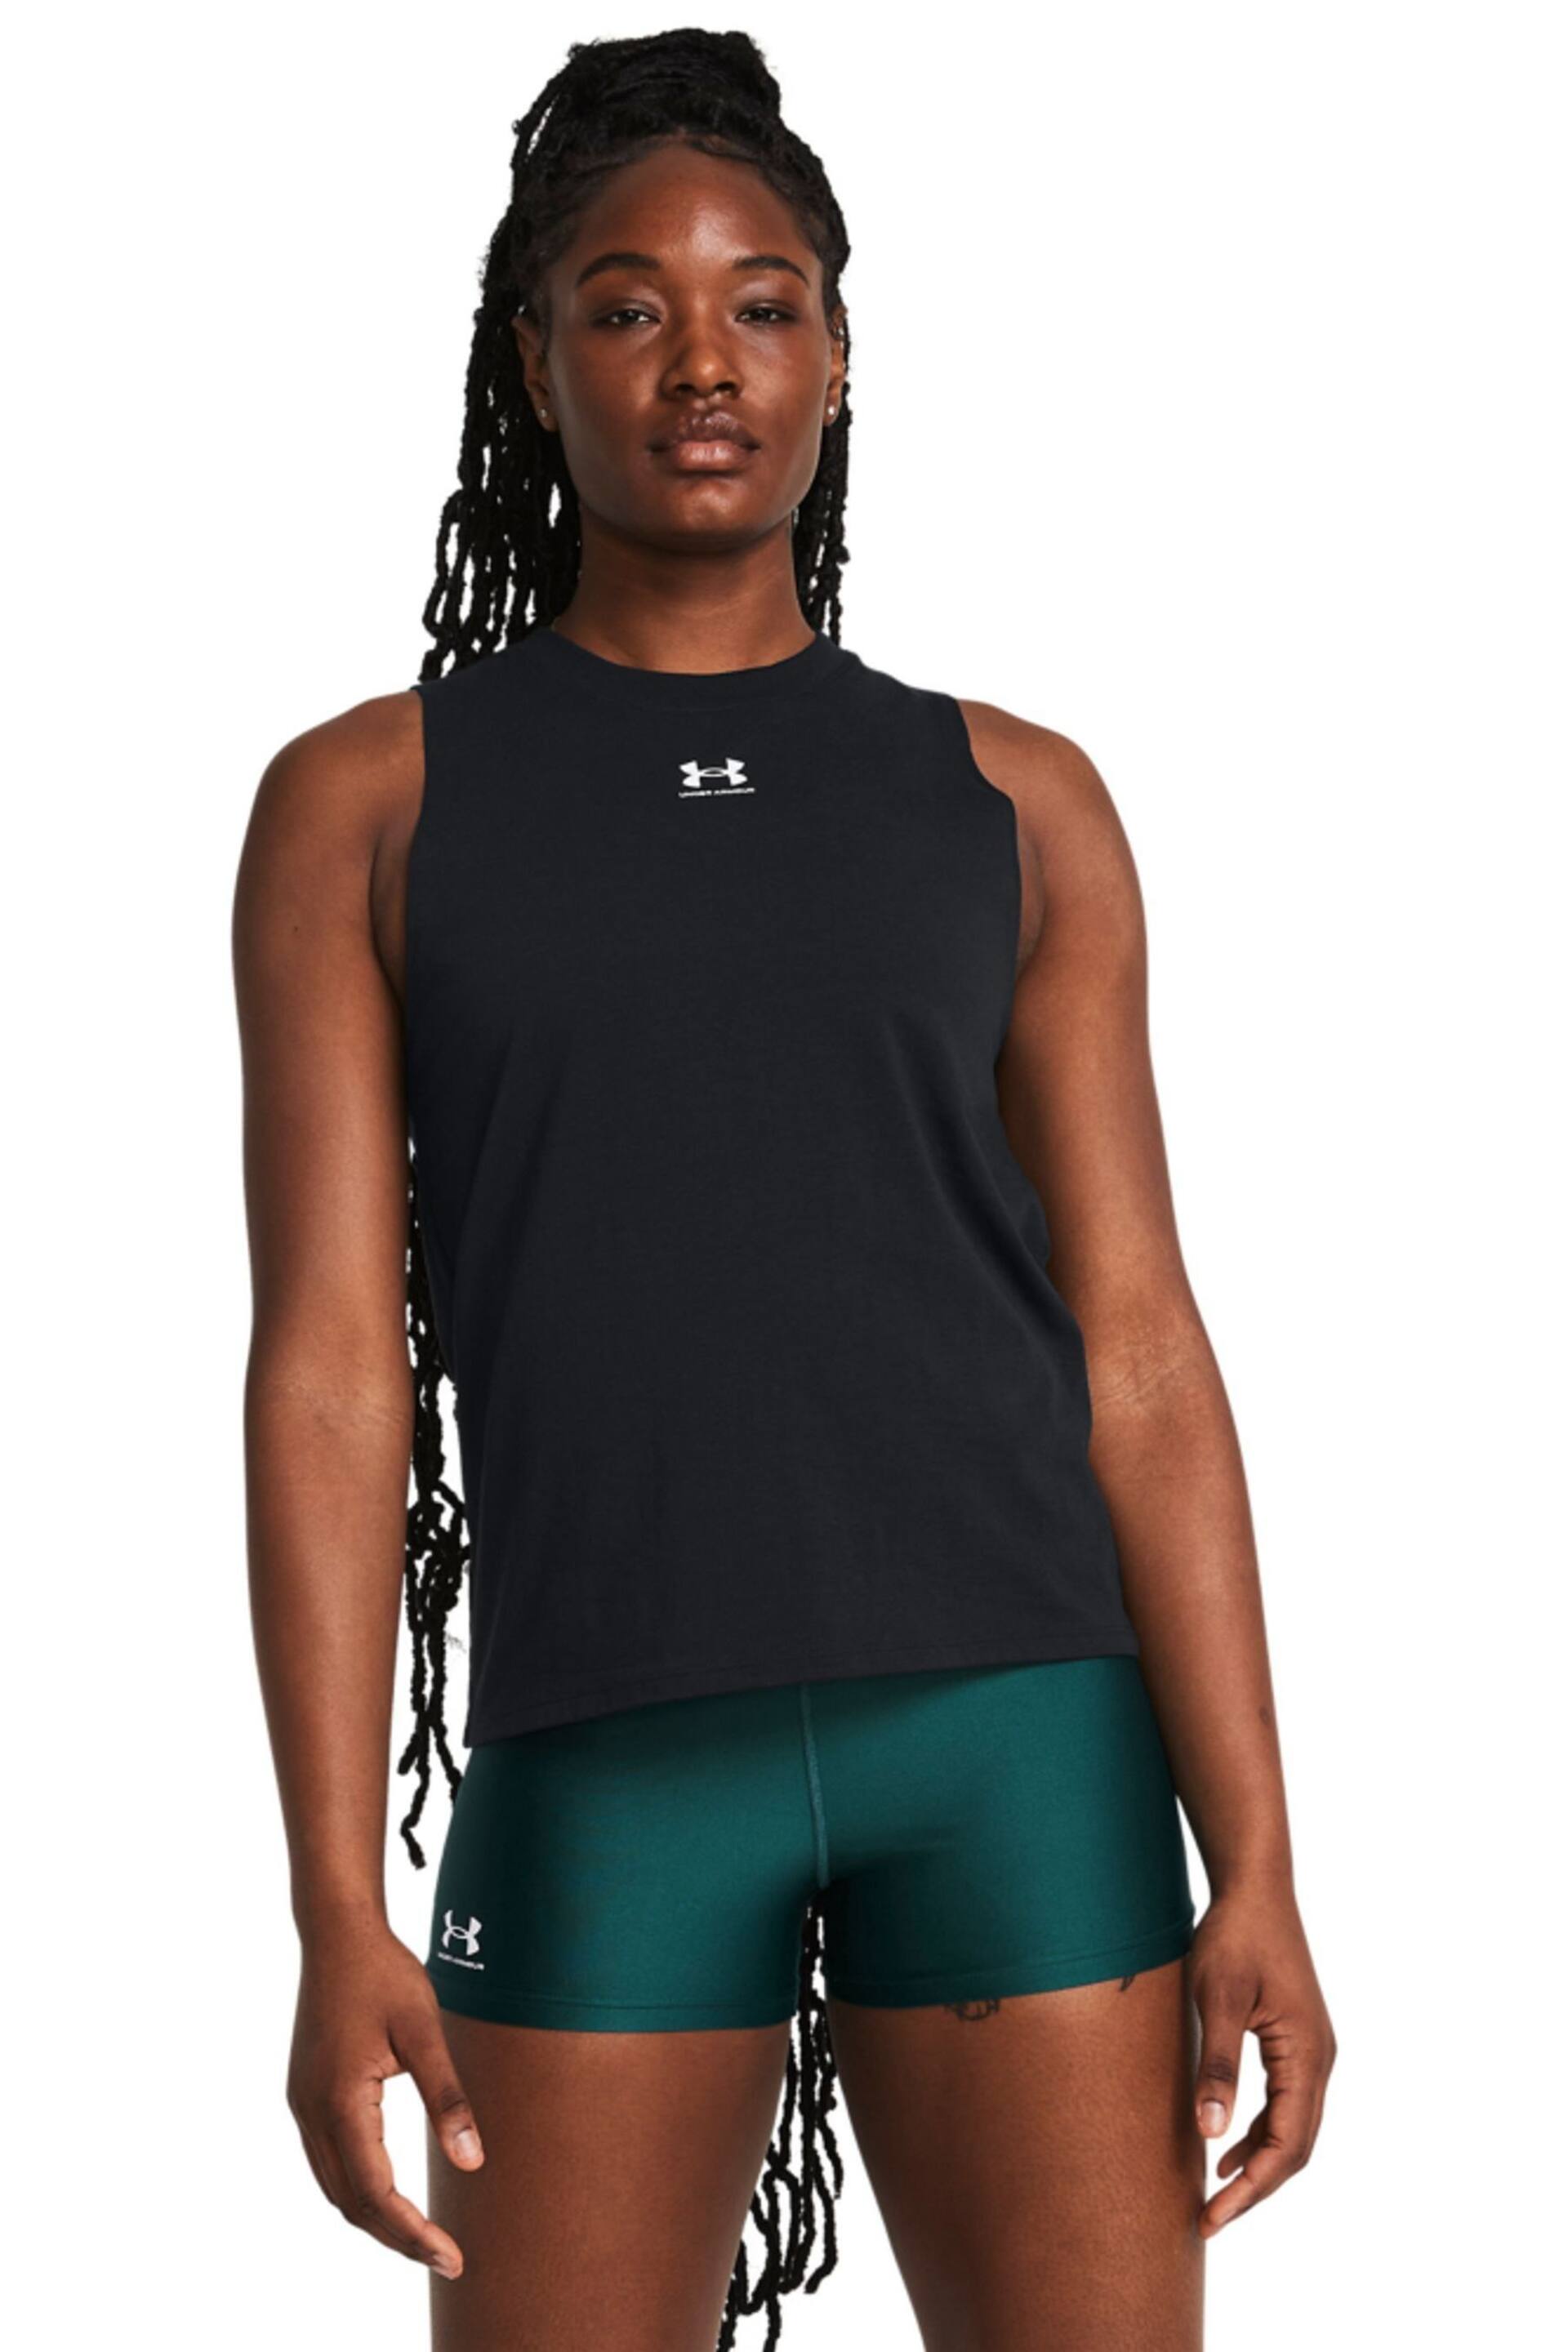 Under Armour Black Campus Muscle Vest - Image 1 of 6